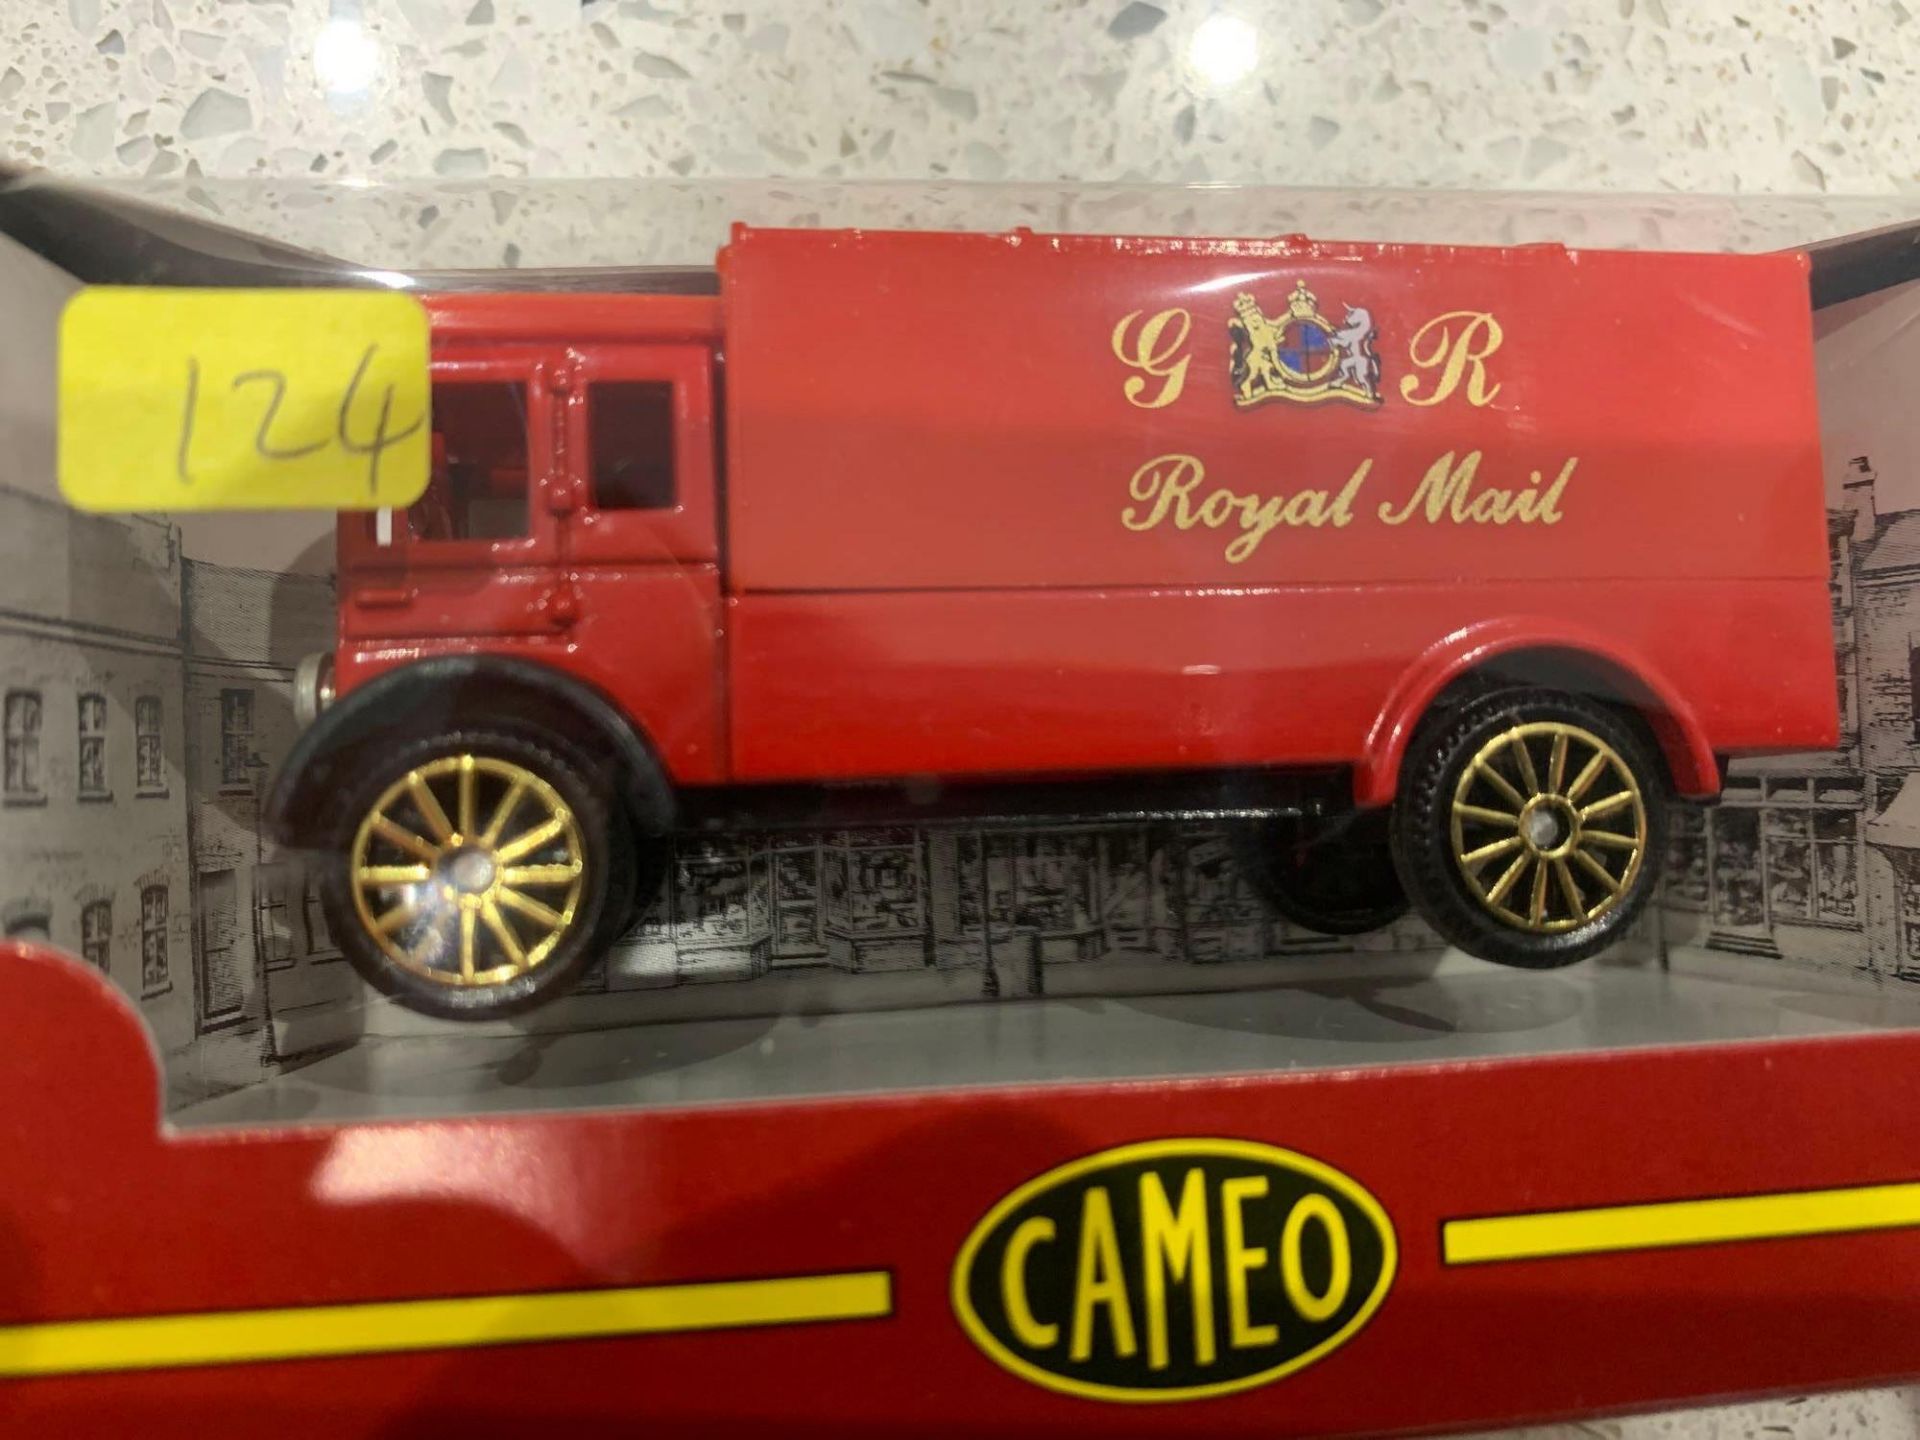 2 X Cameo Trucks 2 X King George Royal Mail Marked Vehicles Truck And Van - Image 6 of 6